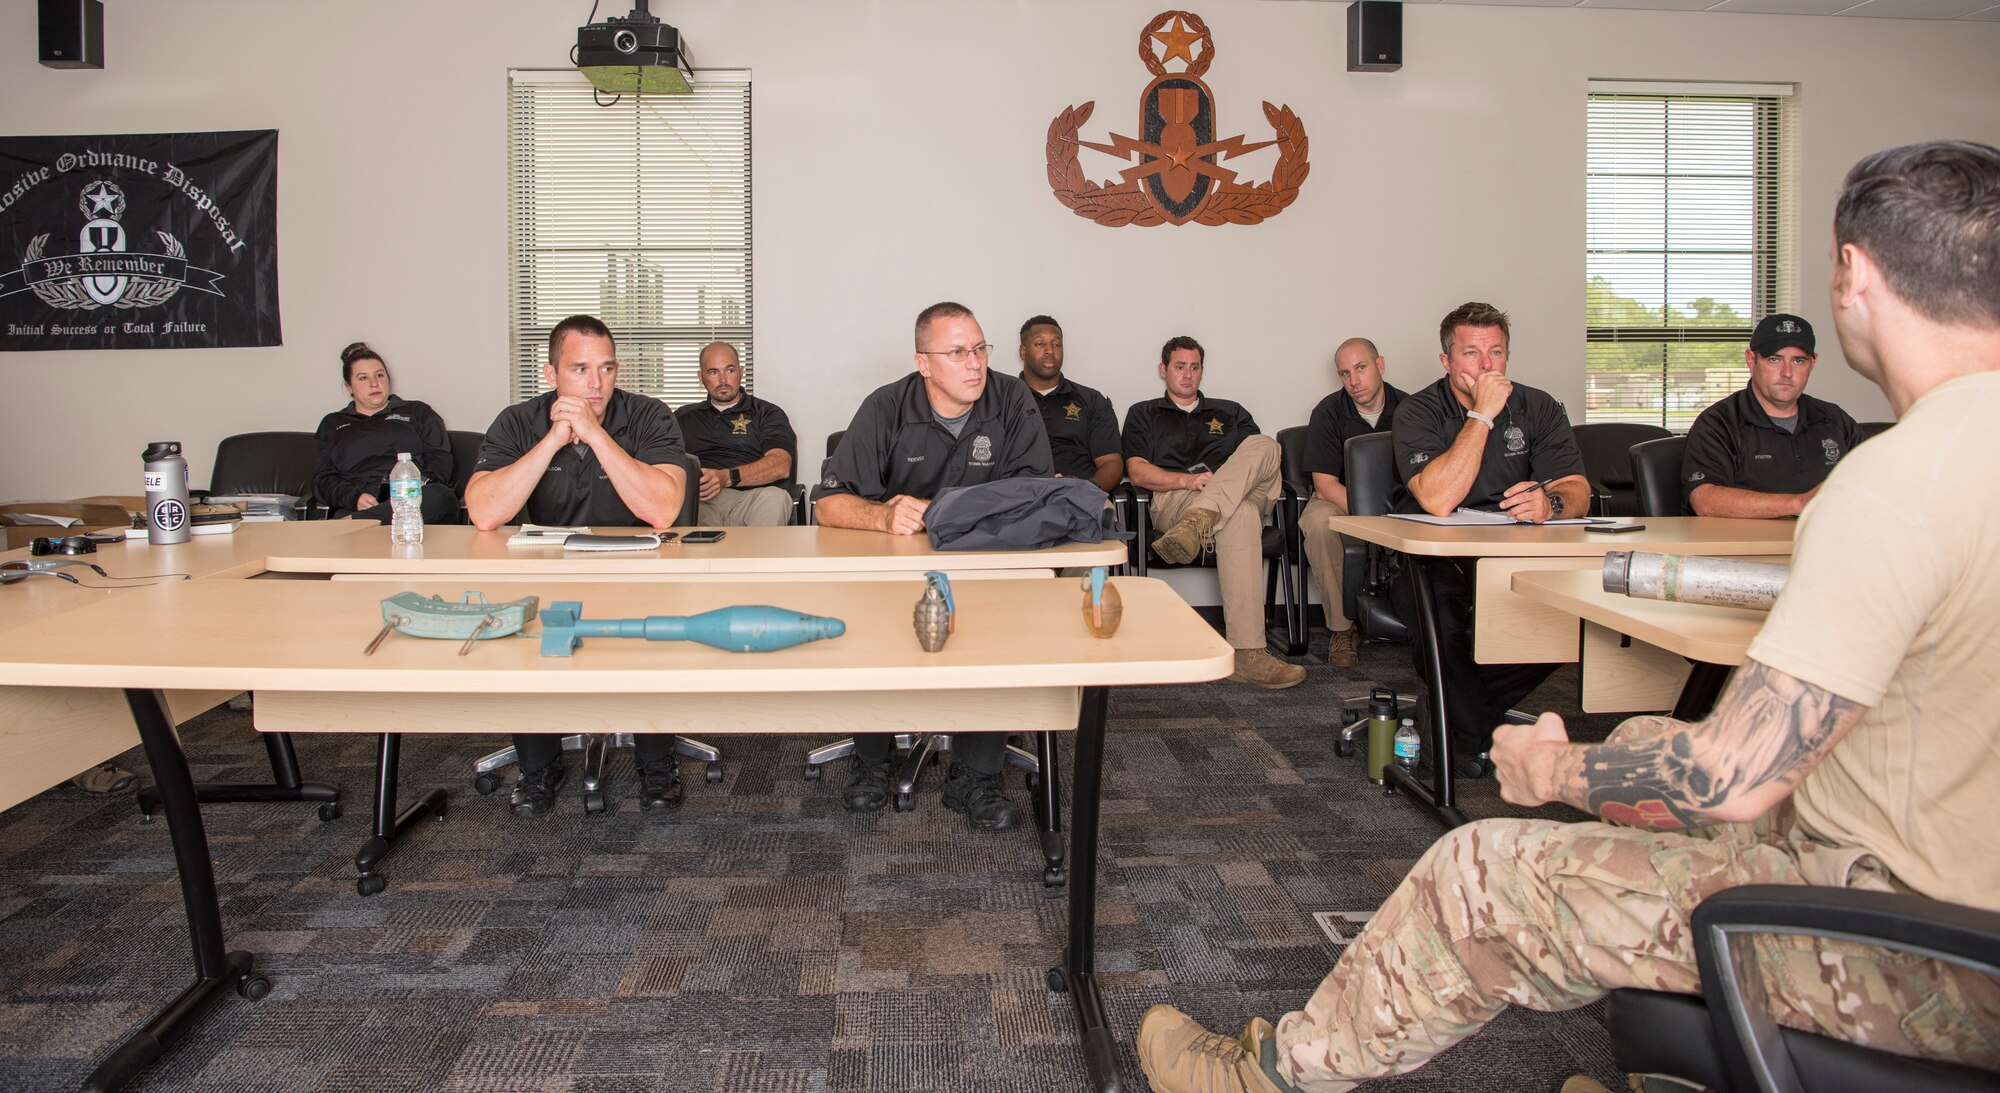 U.S. Air Force explosive ordnance disposal Airman participate in an open classroom about military ordnance with Tampa Police Department, Hillsborough County Sheriff’s Department and the Federal Bureau of Investigation at MacDill Air Force Base, Fla., Aug. 14, 2019.